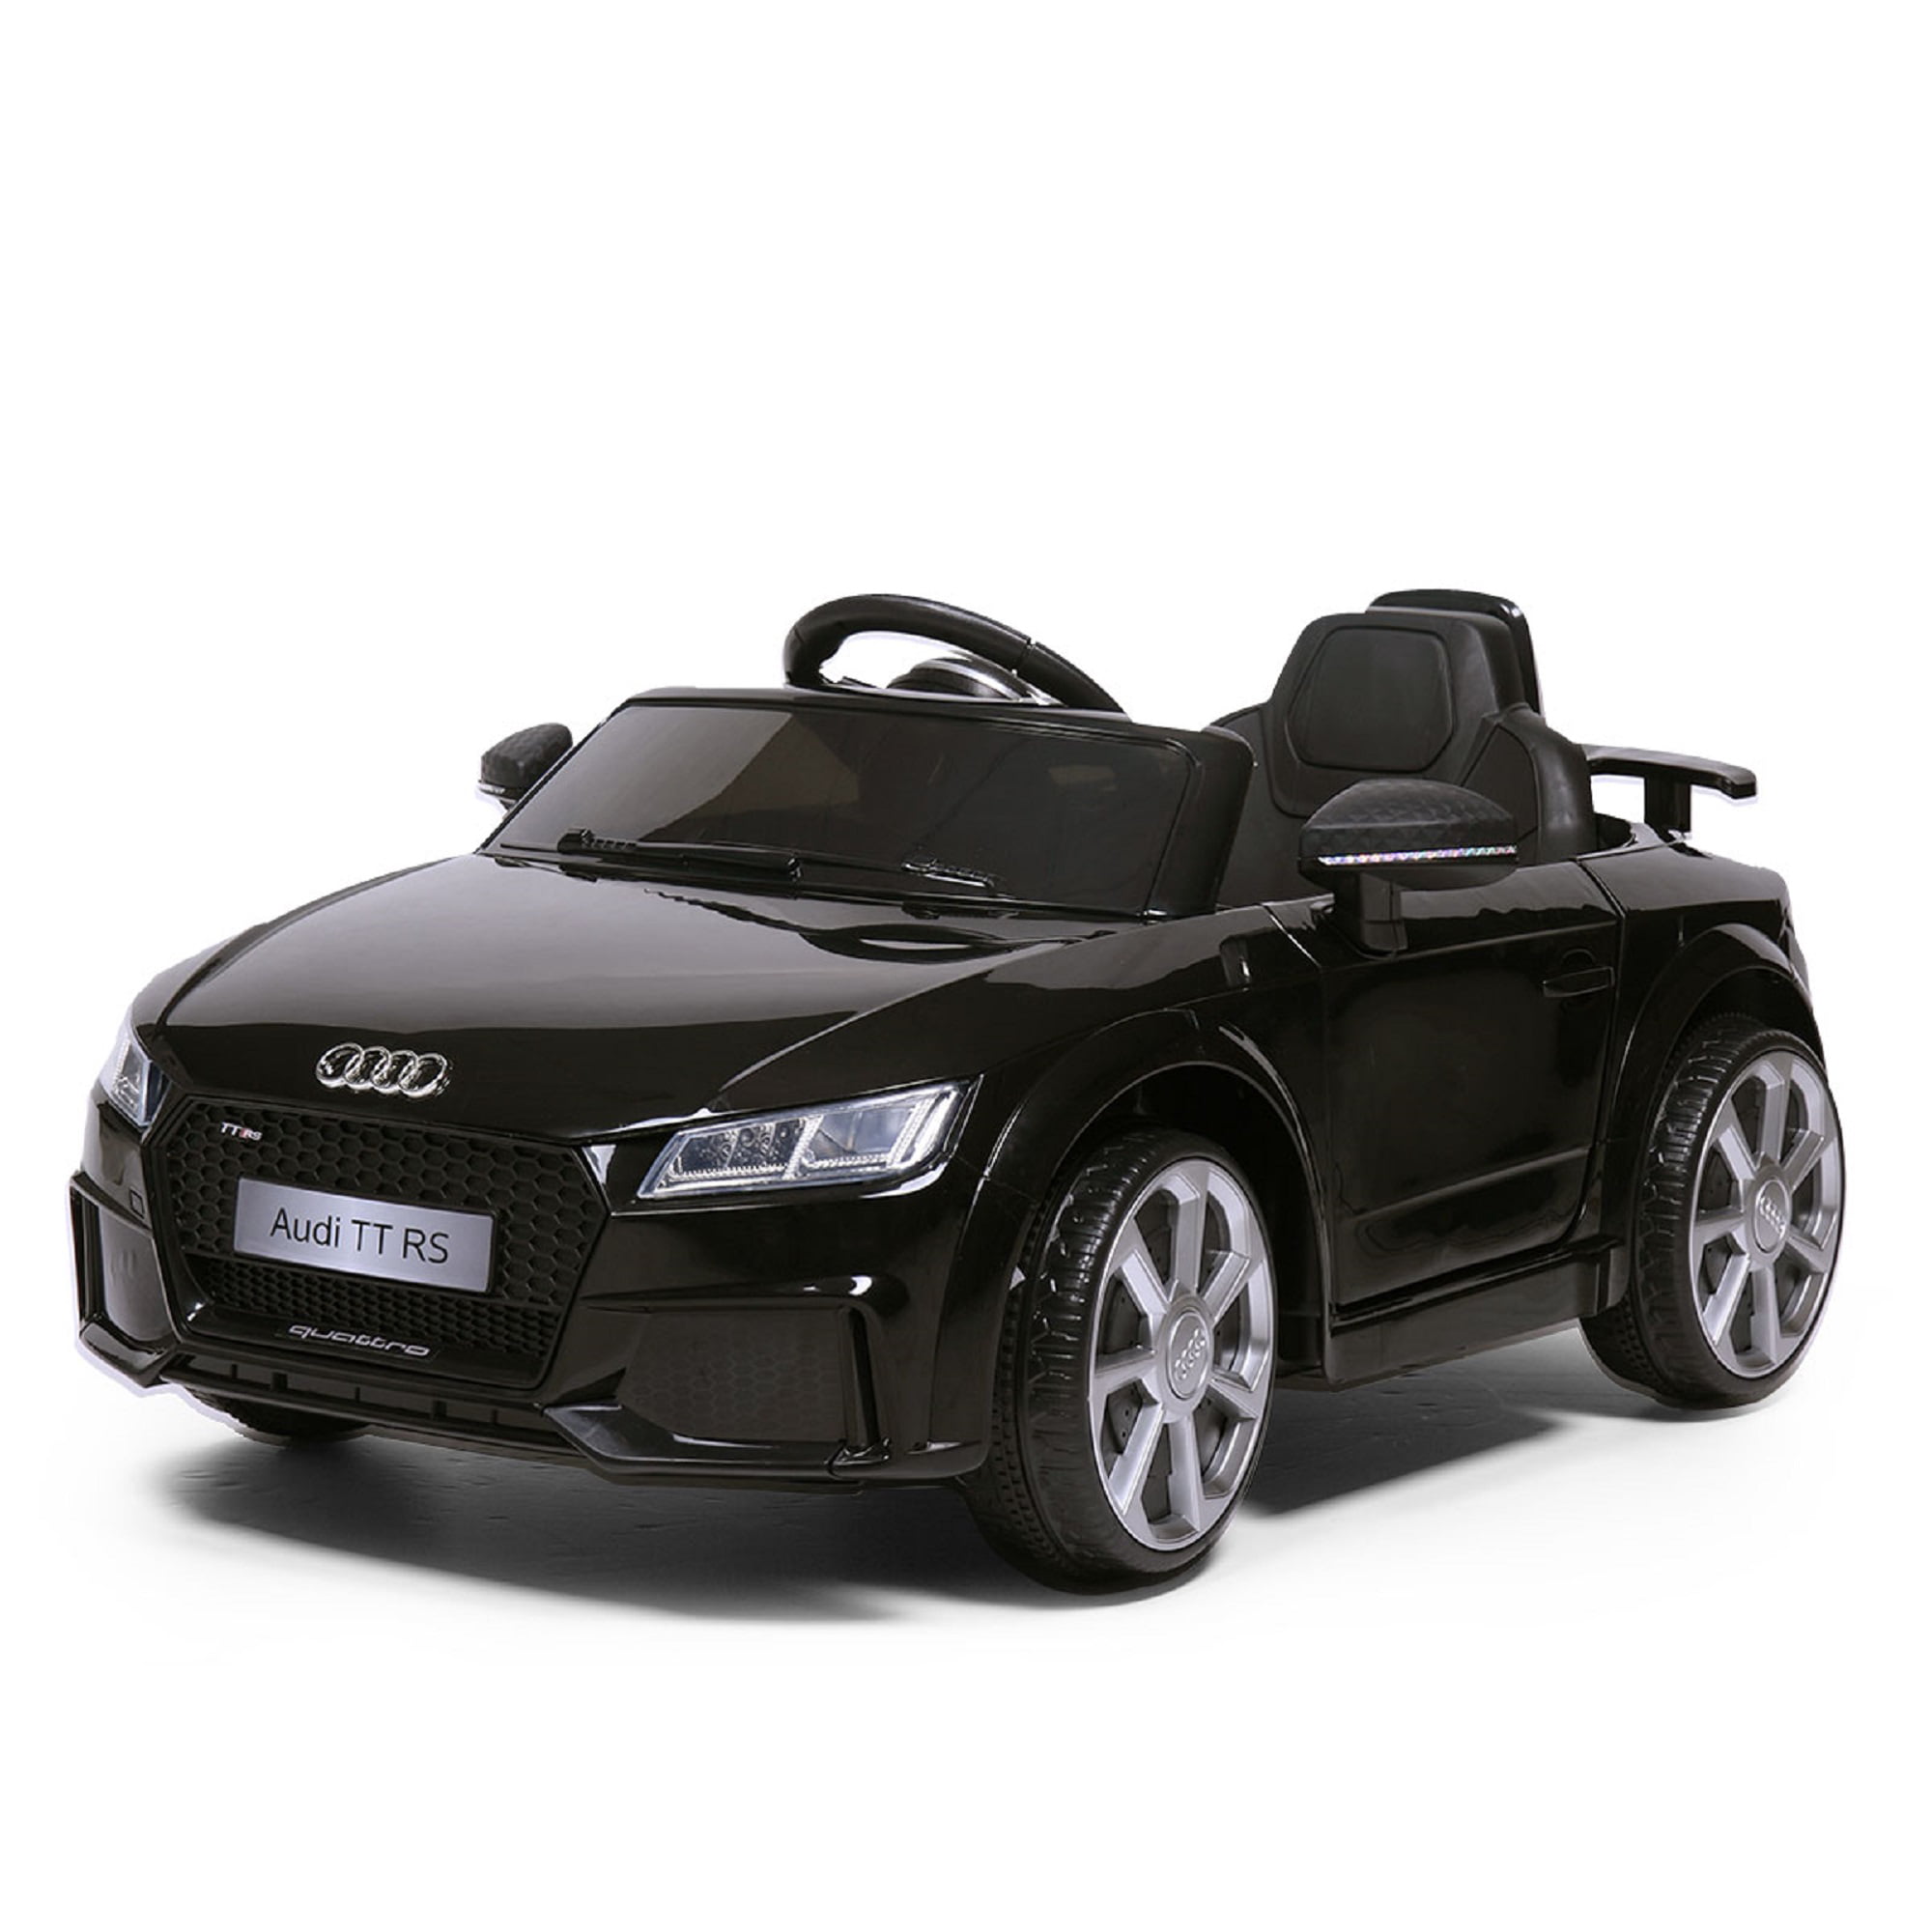 AUDI TT RS Licensed Kids RIde On Car 6V Battery Powered Remote Control Cars 